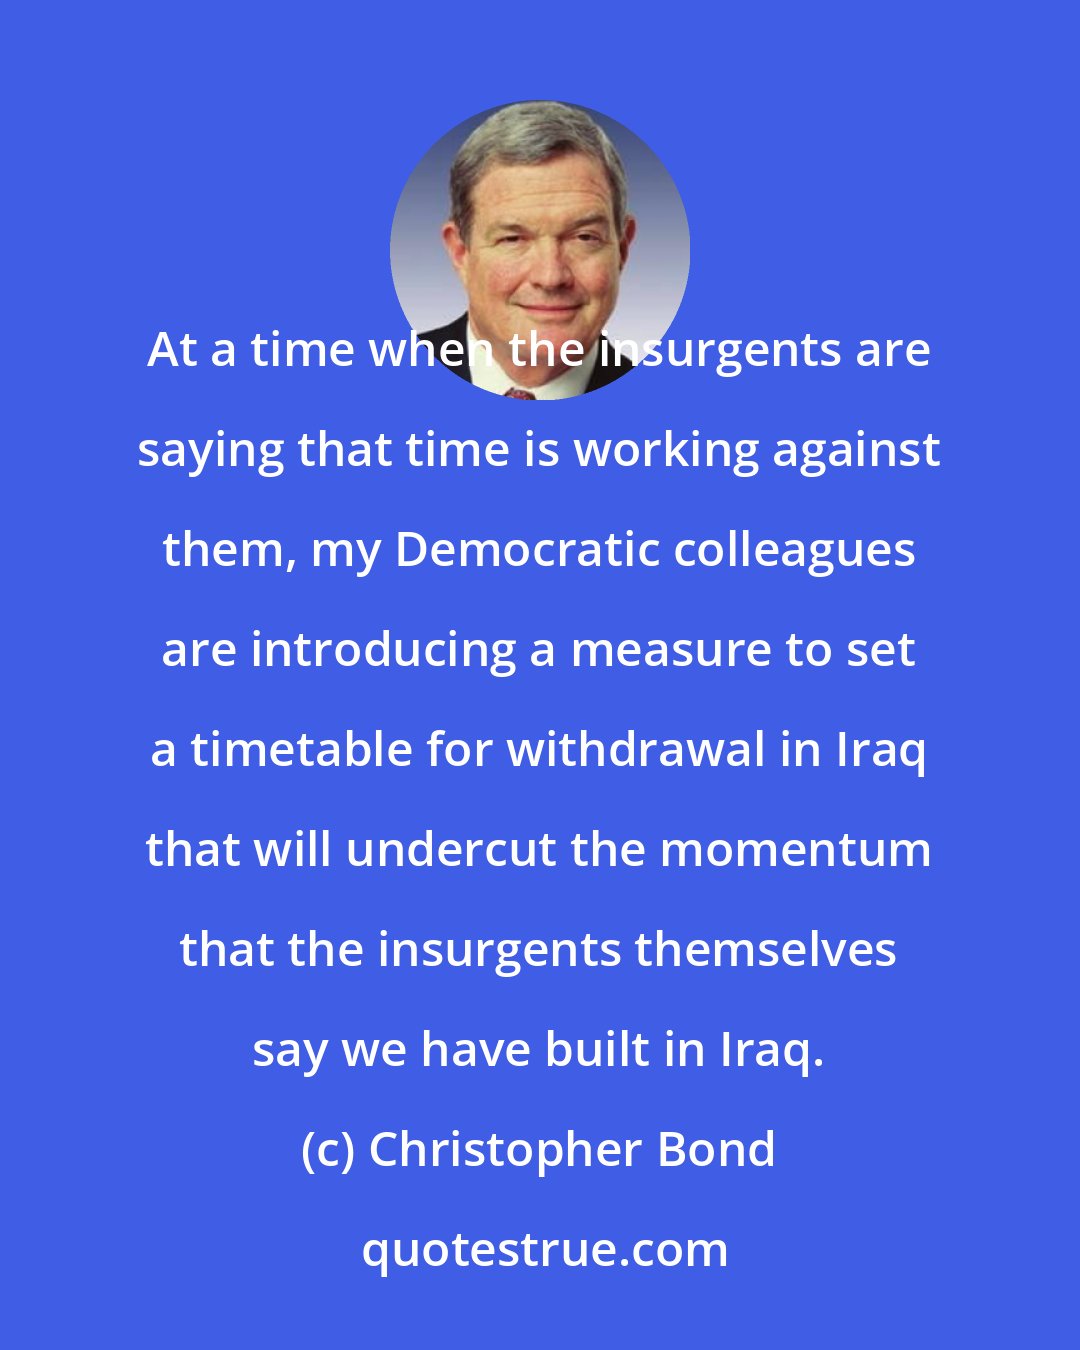 Christopher Bond: At a time when the insurgents are saying that time is working against them, my Democratic colleagues are introducing a measure to set a timetable for withdrawal in Iraq that will undercut the momentum that the insurgents themselves say we have built in Iraq.